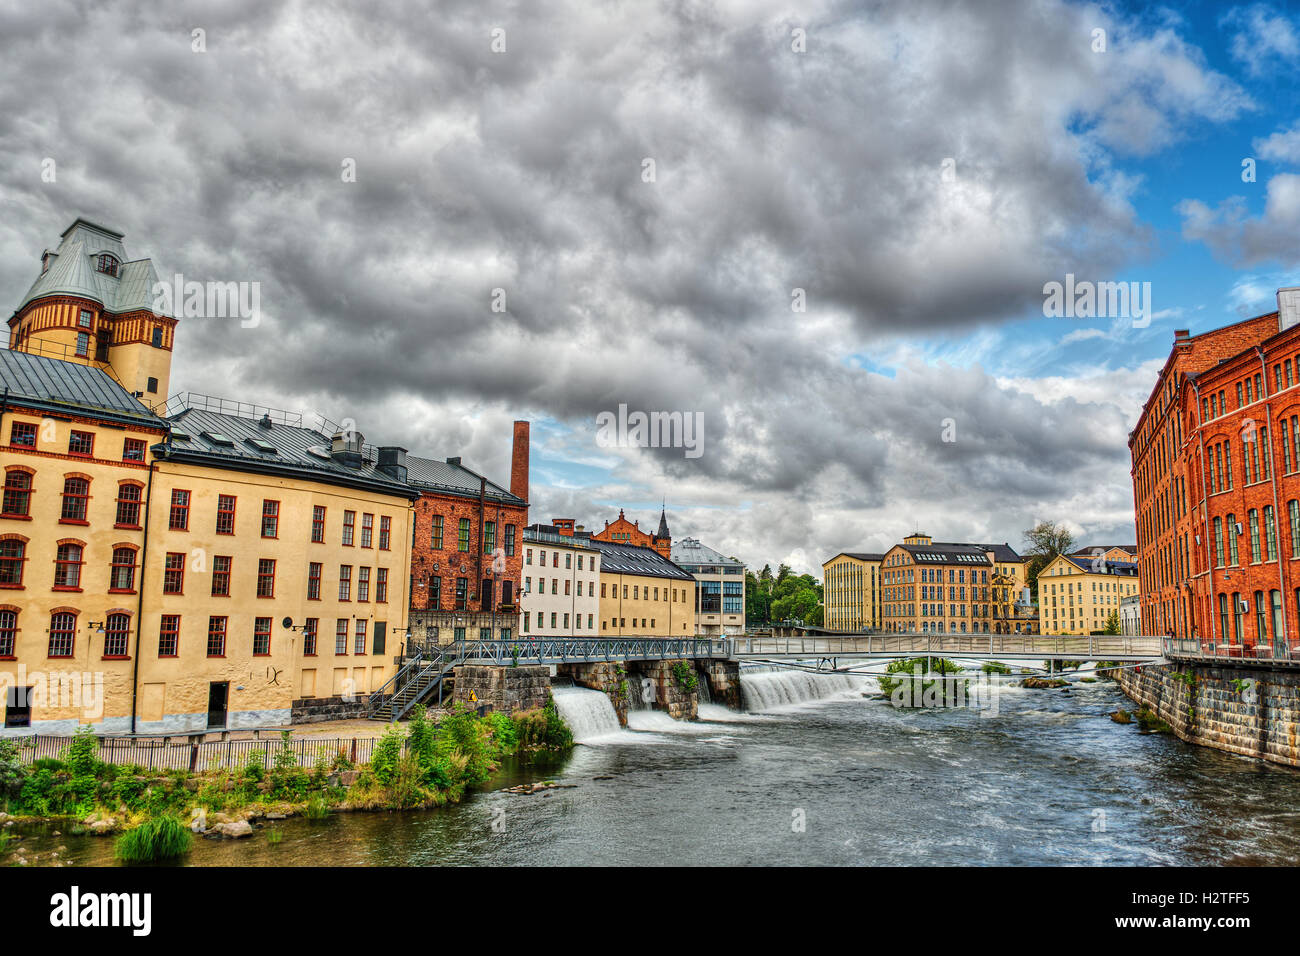 July 2016, industrial buildings in Norrköping (Sweden), HDR-technique Stock Photo